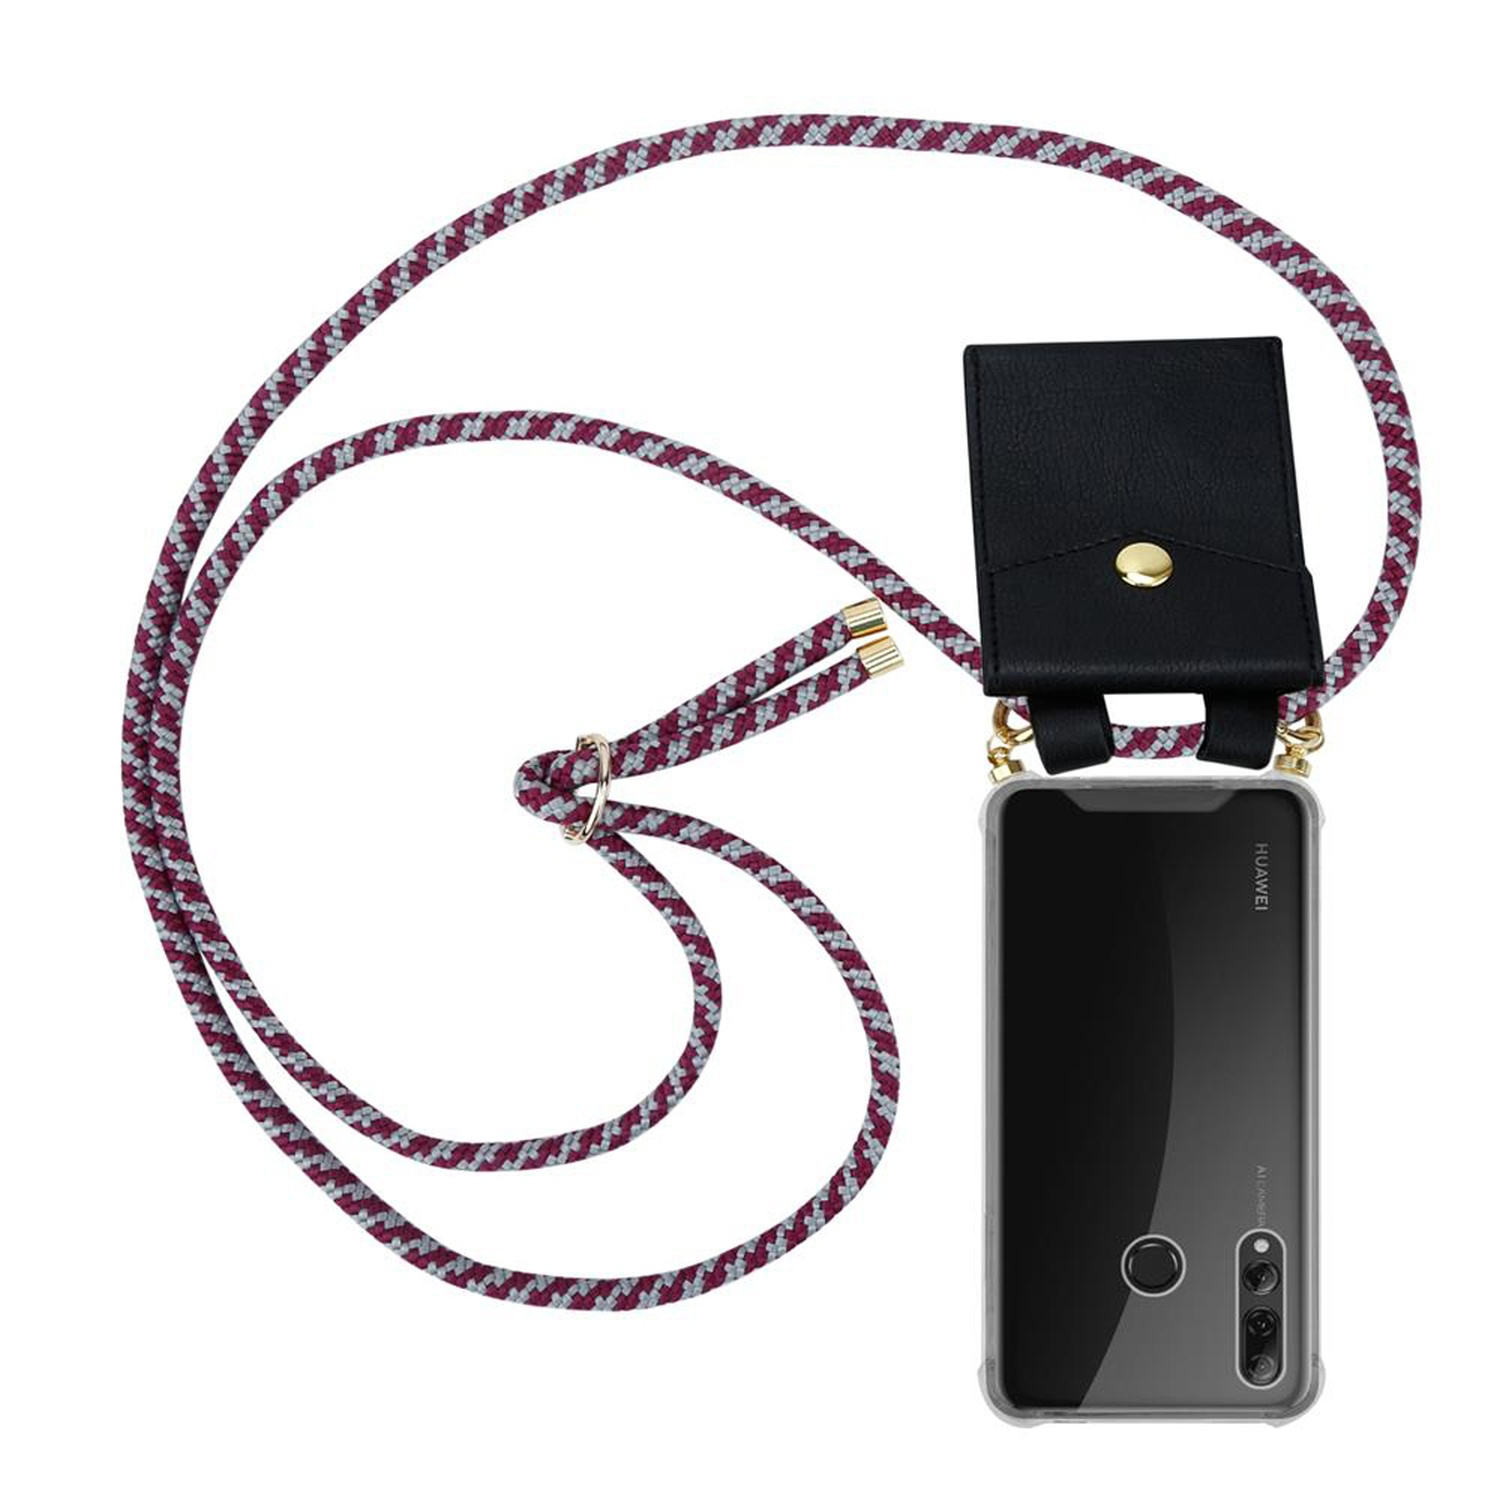 CADORABO Handy Kette mit Huawei, WEIß und Gold Hülle, P 2019, abnehmbarer Ringen, Backcover, Kordel ROT Band SMART PLUS